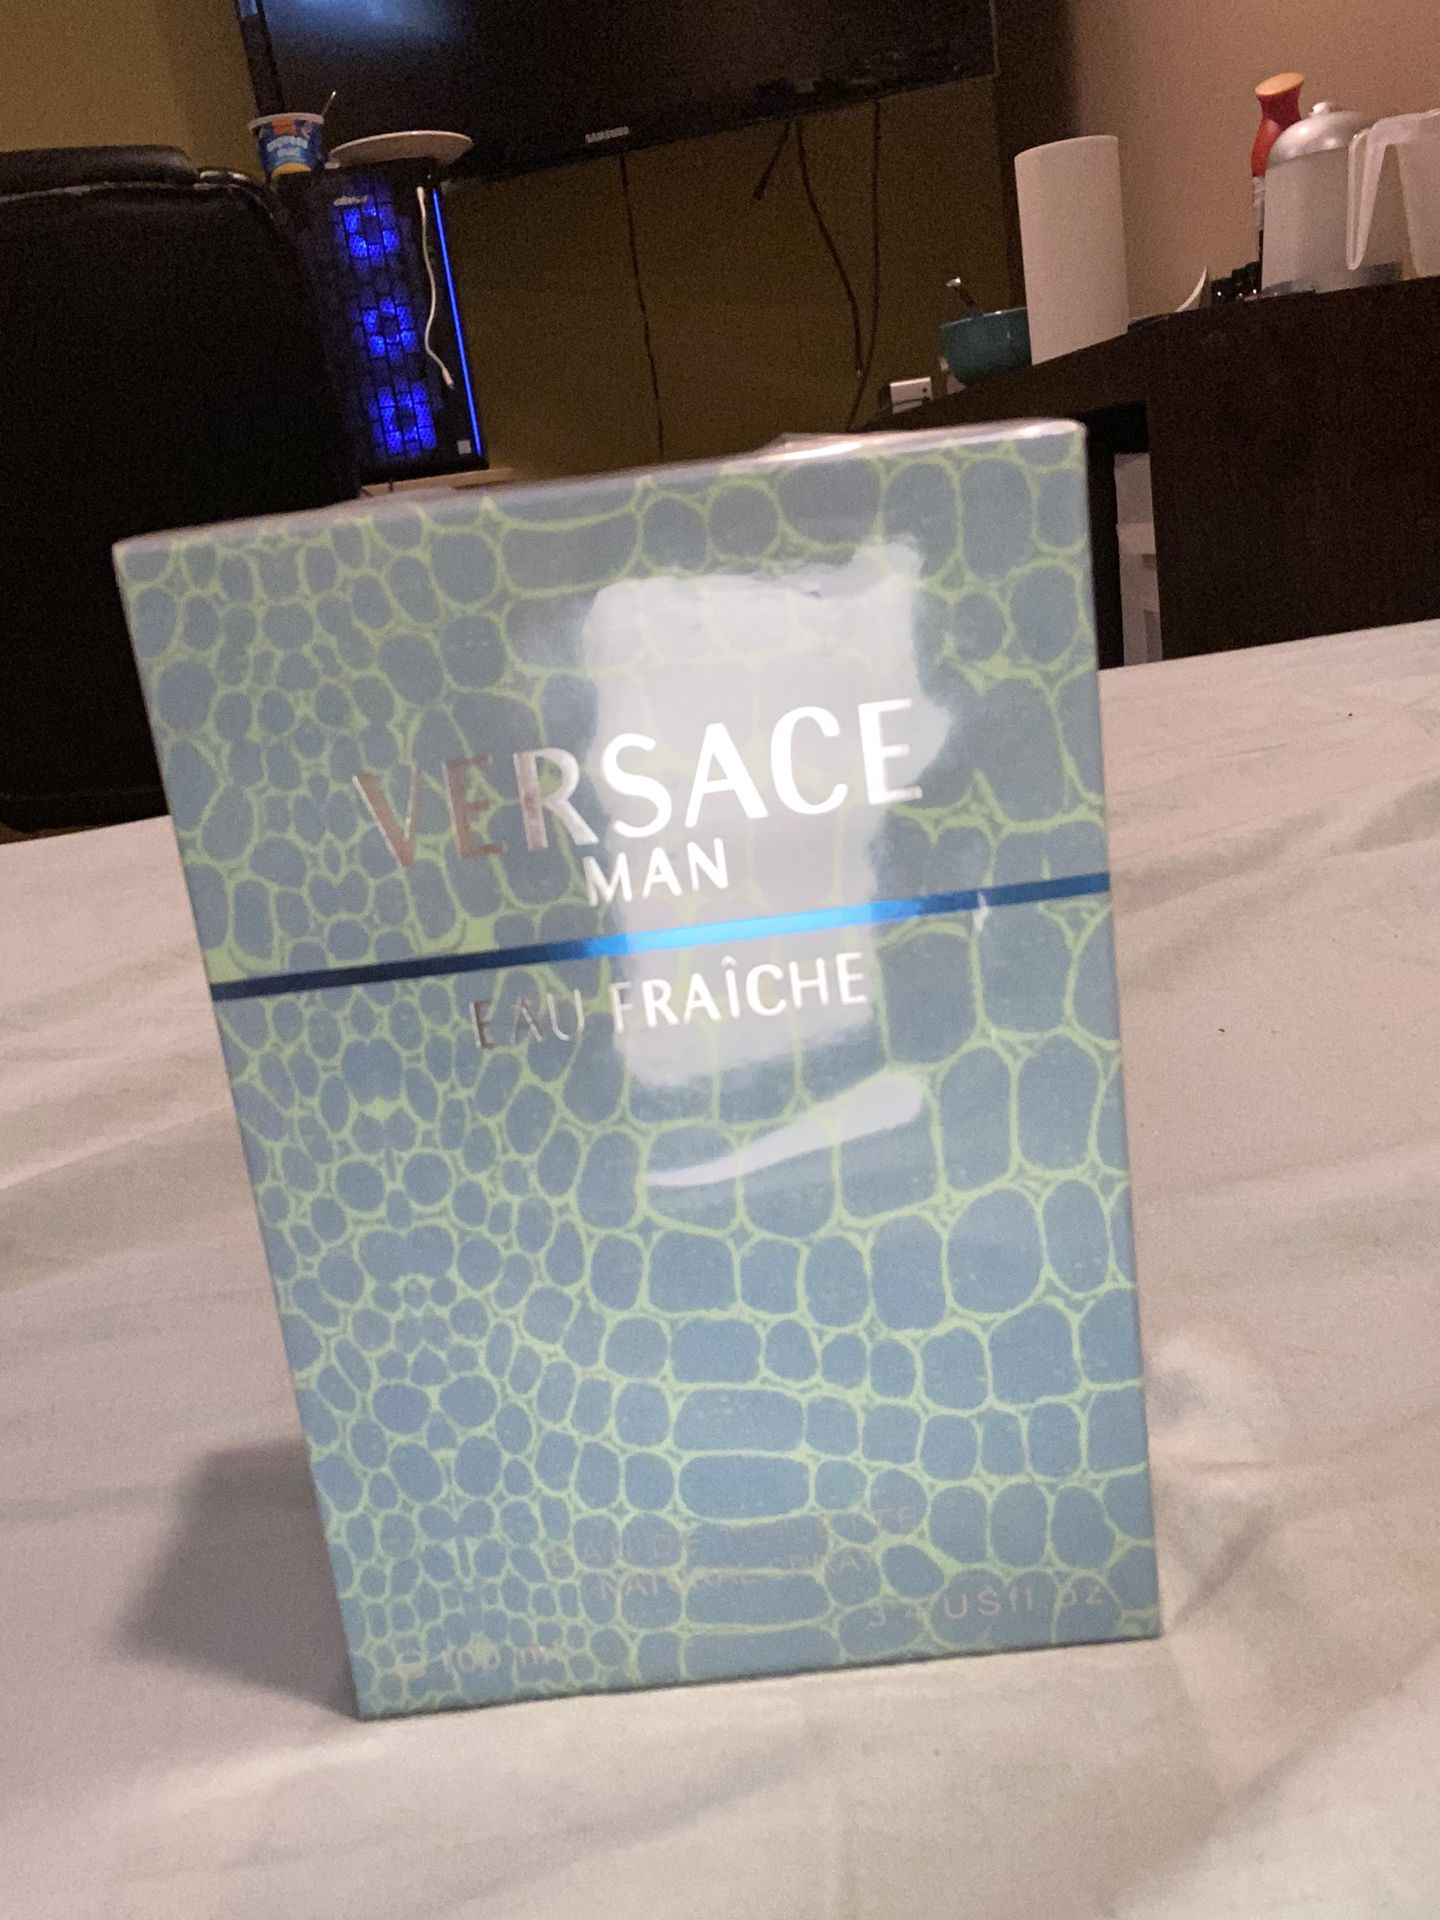 Versace Cologne unopened box